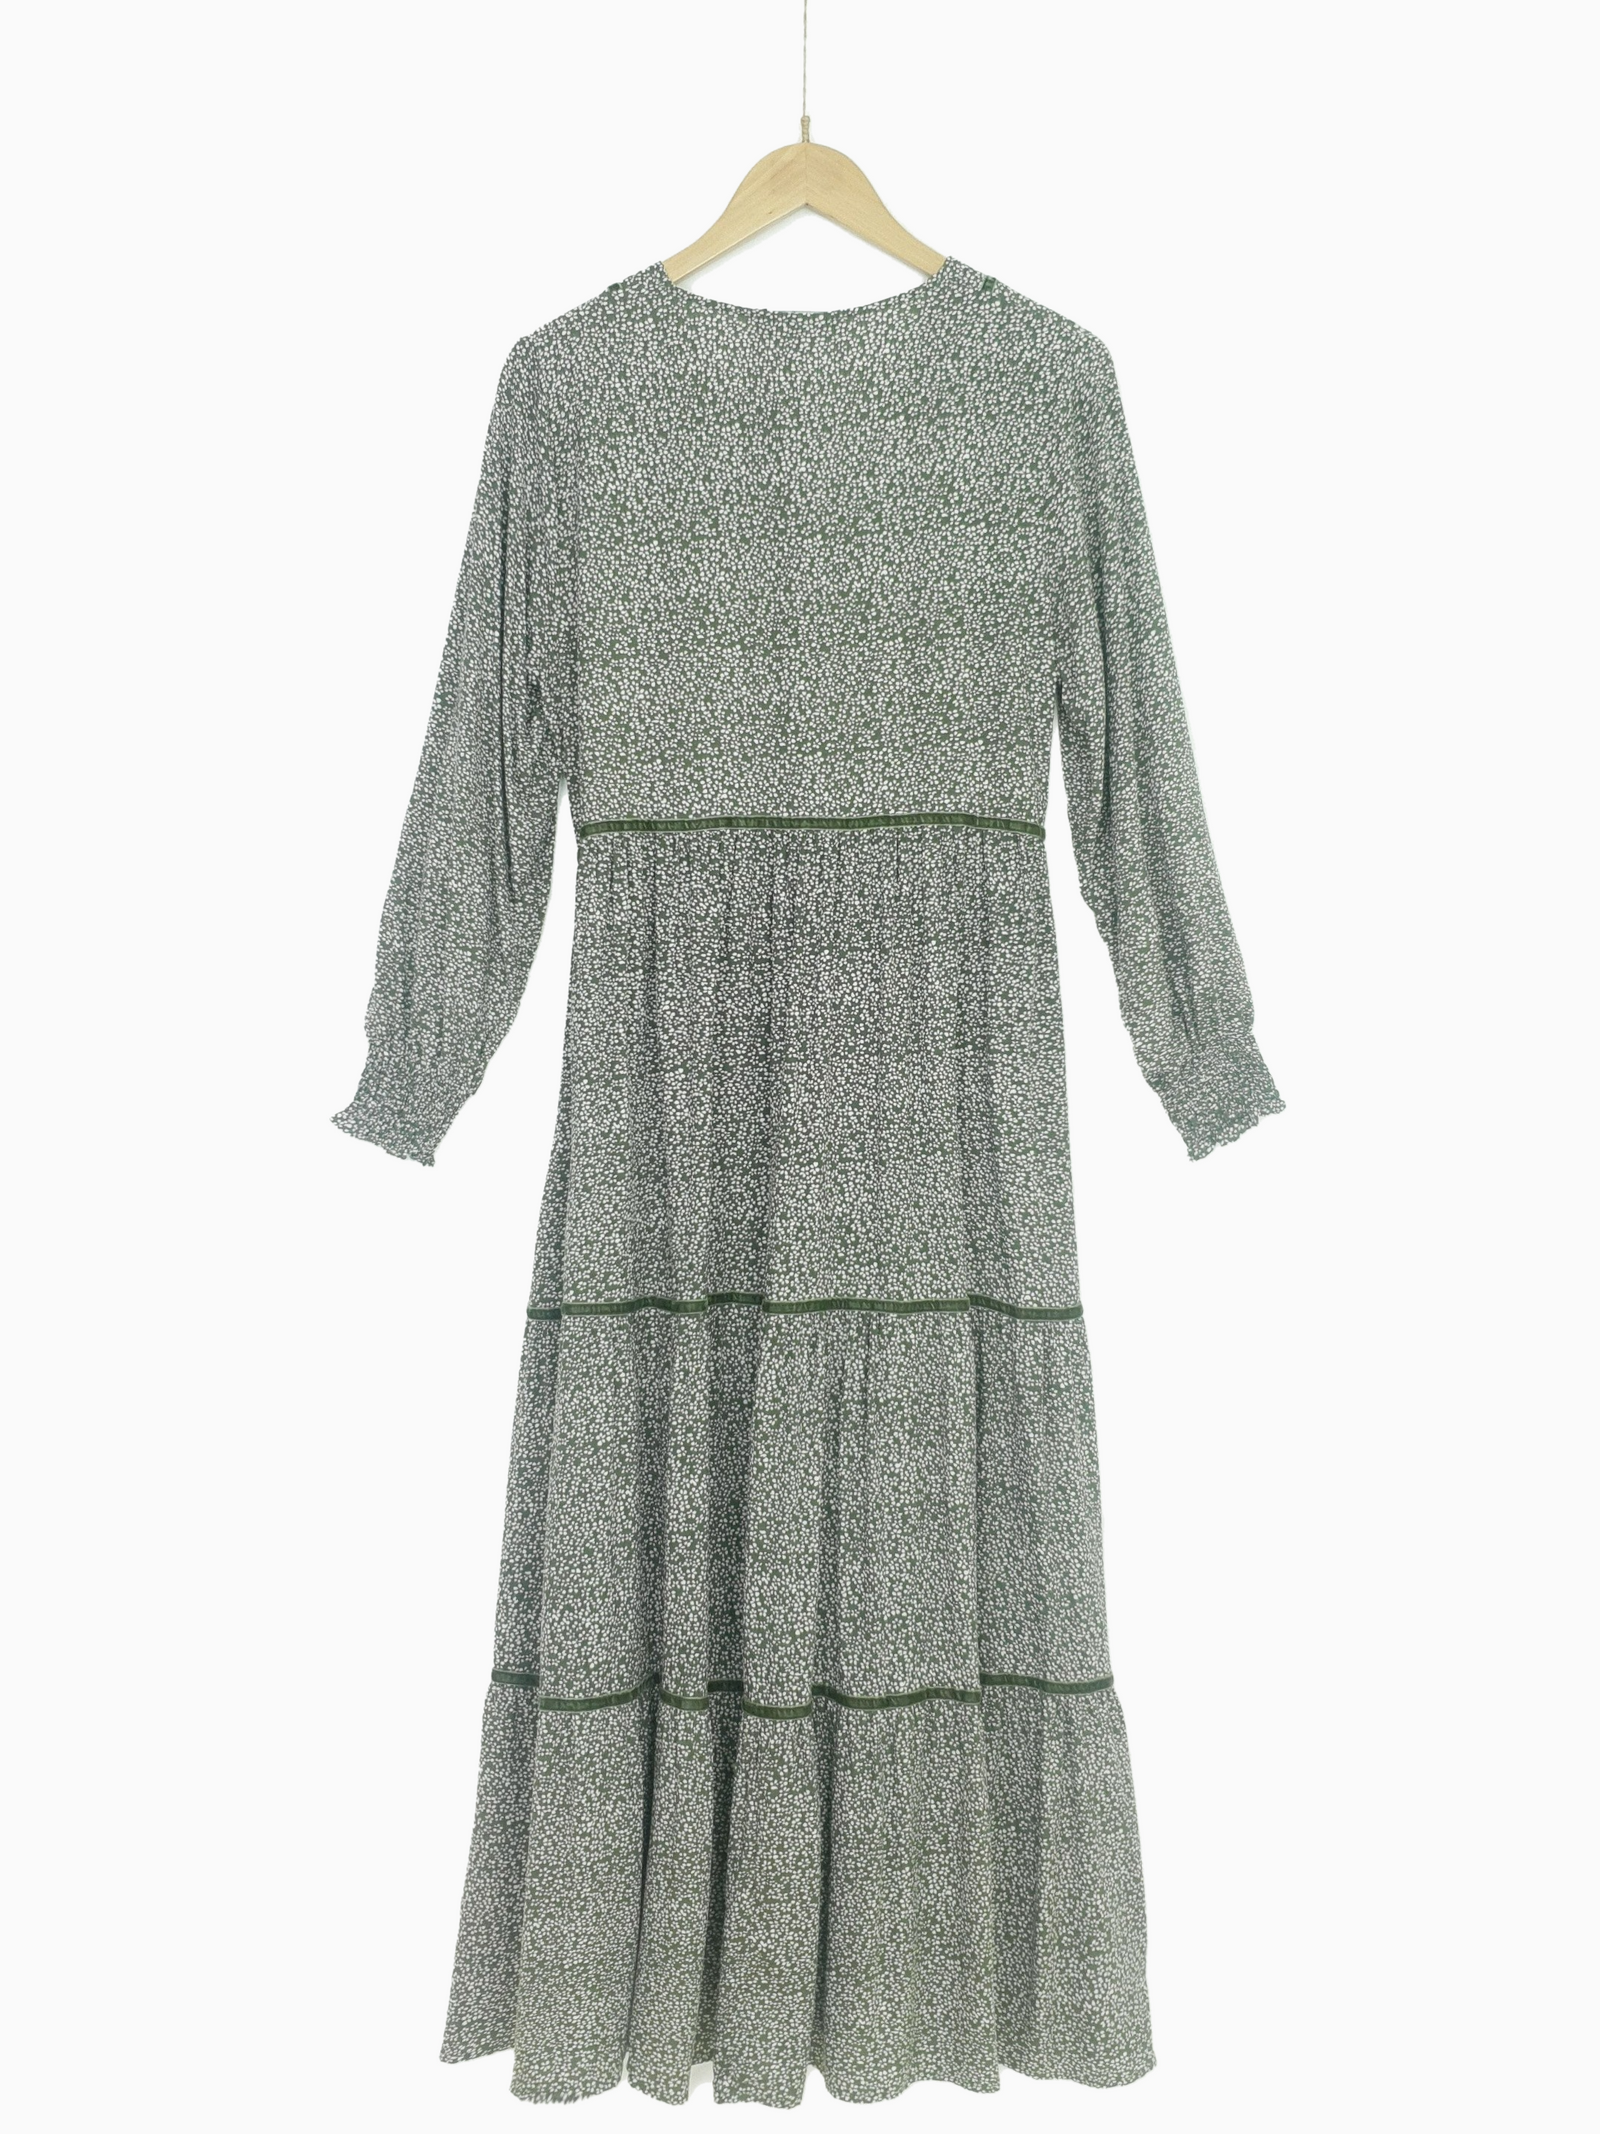 KATO | Patterend Long Dress with Trim | Green